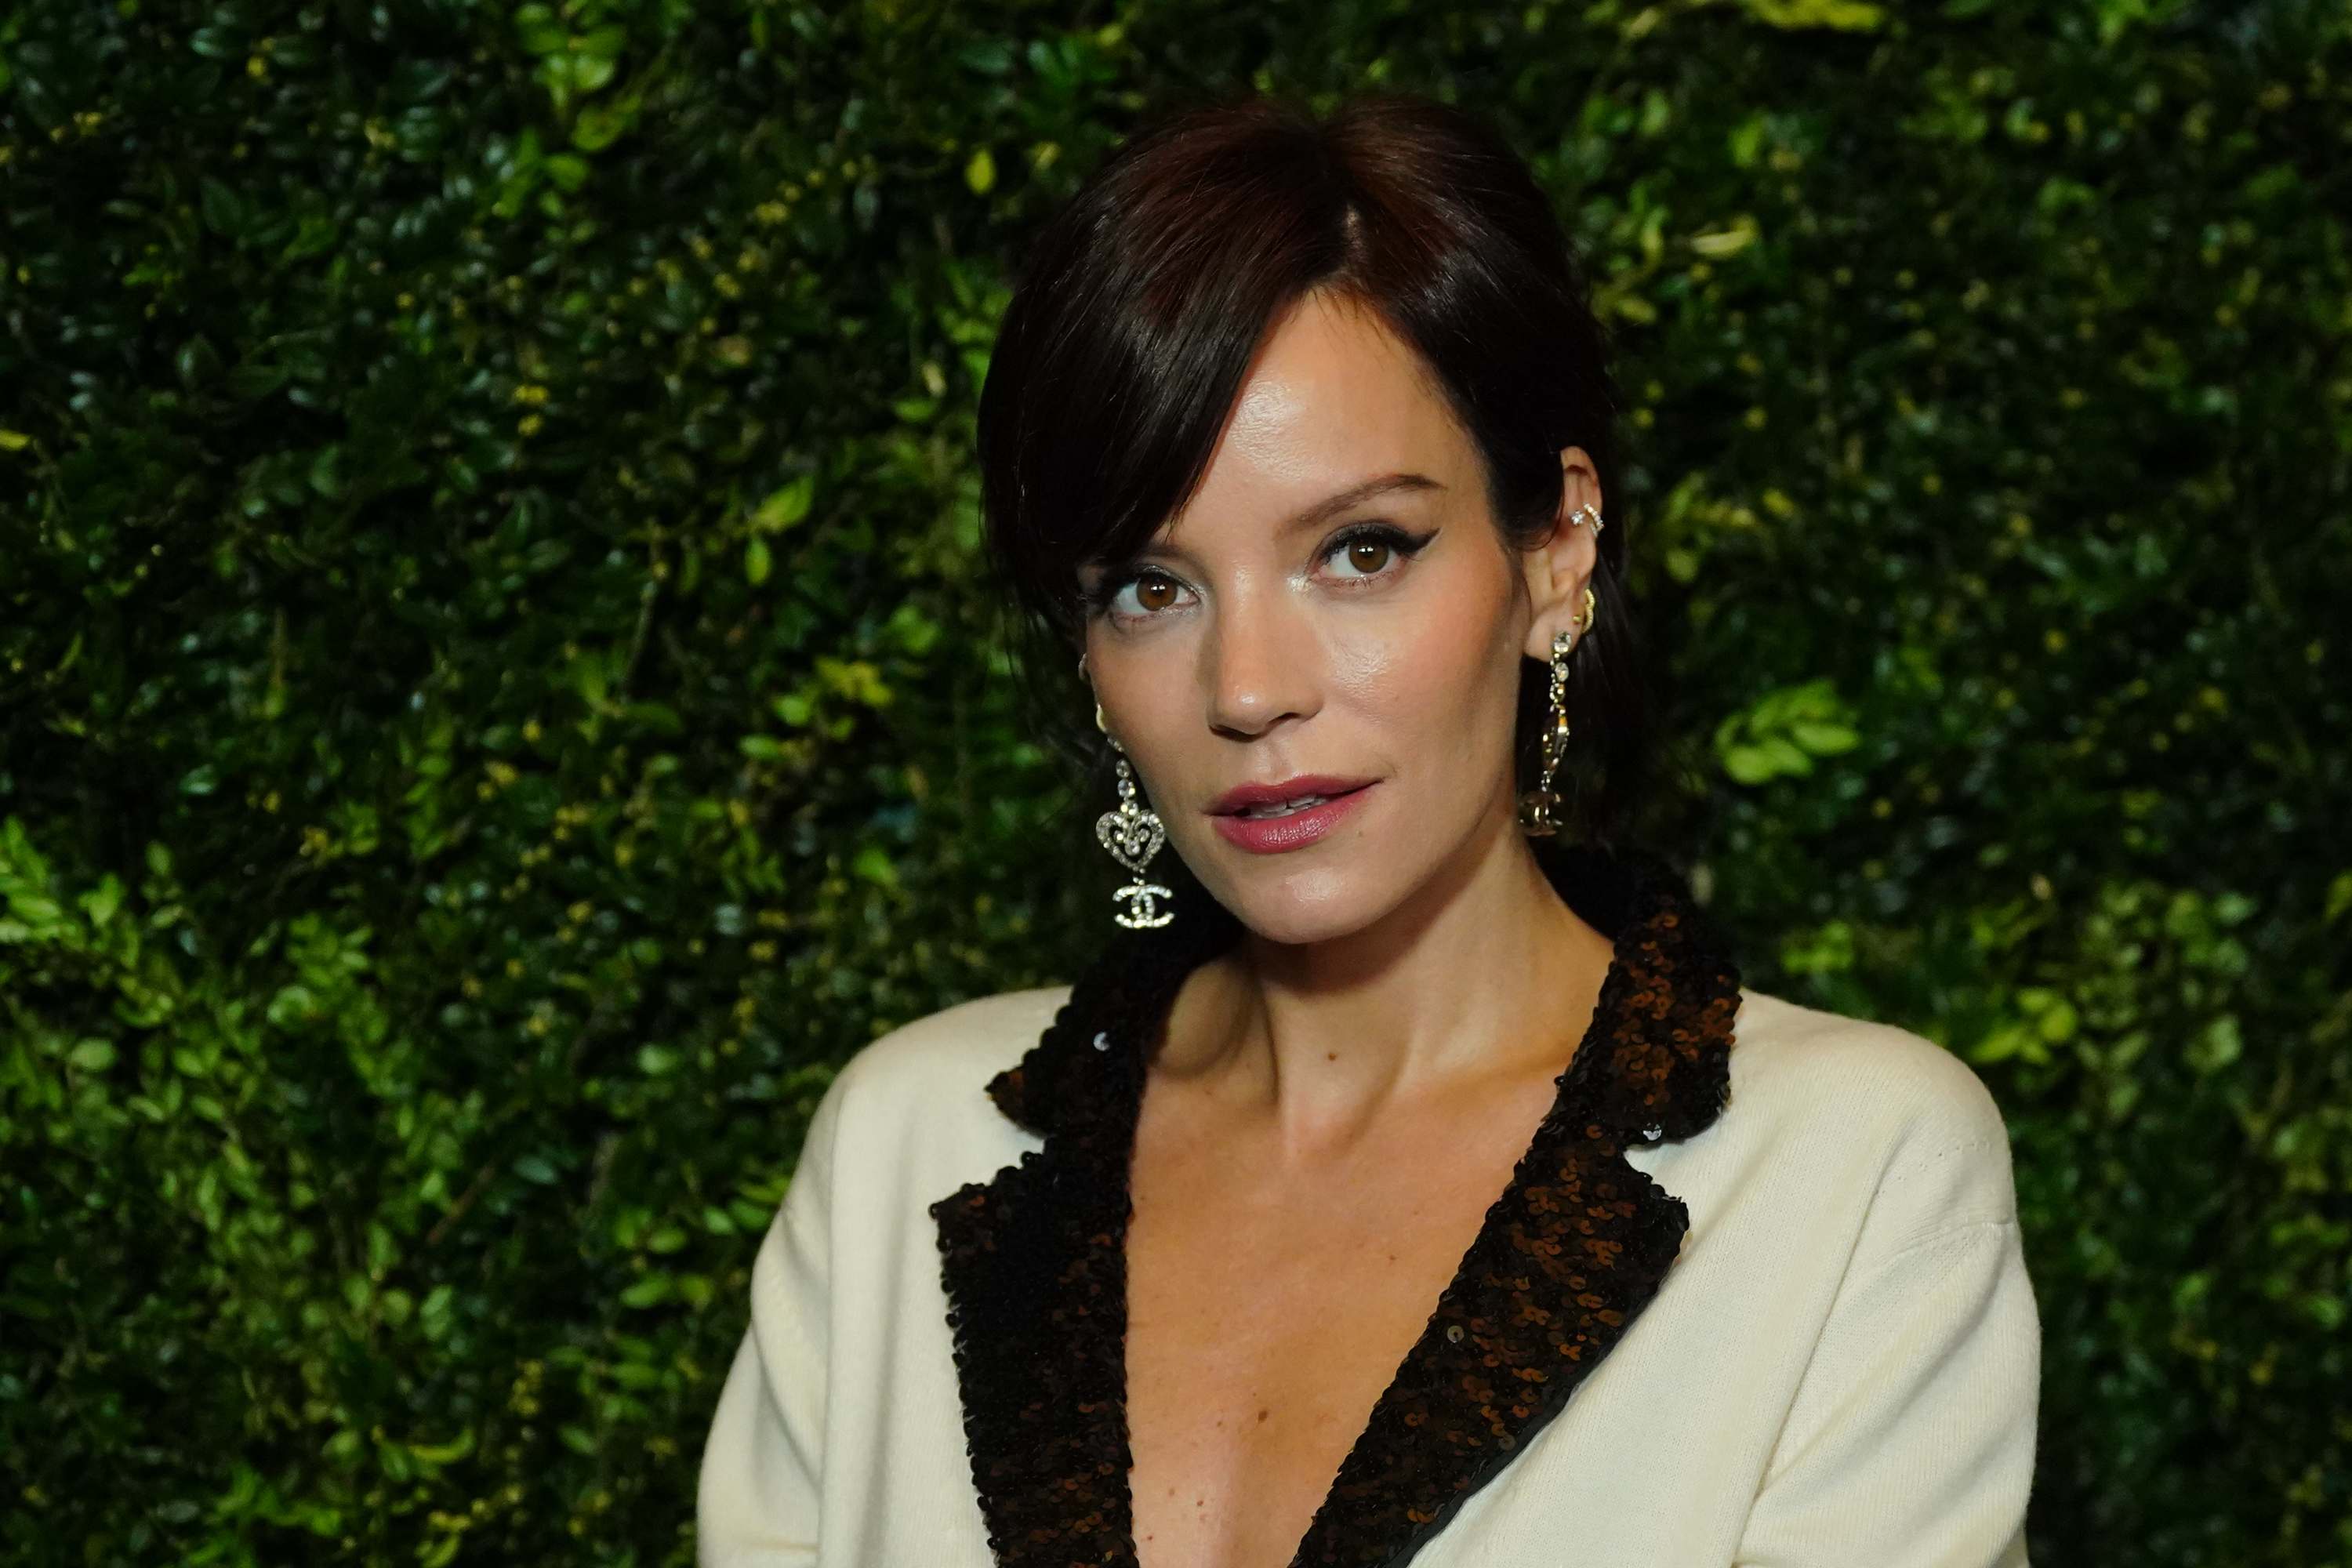 Lily Allen poses in a blazer with dark lapels in front of a leafy backdrop. She has short hair and wears dangling earrings